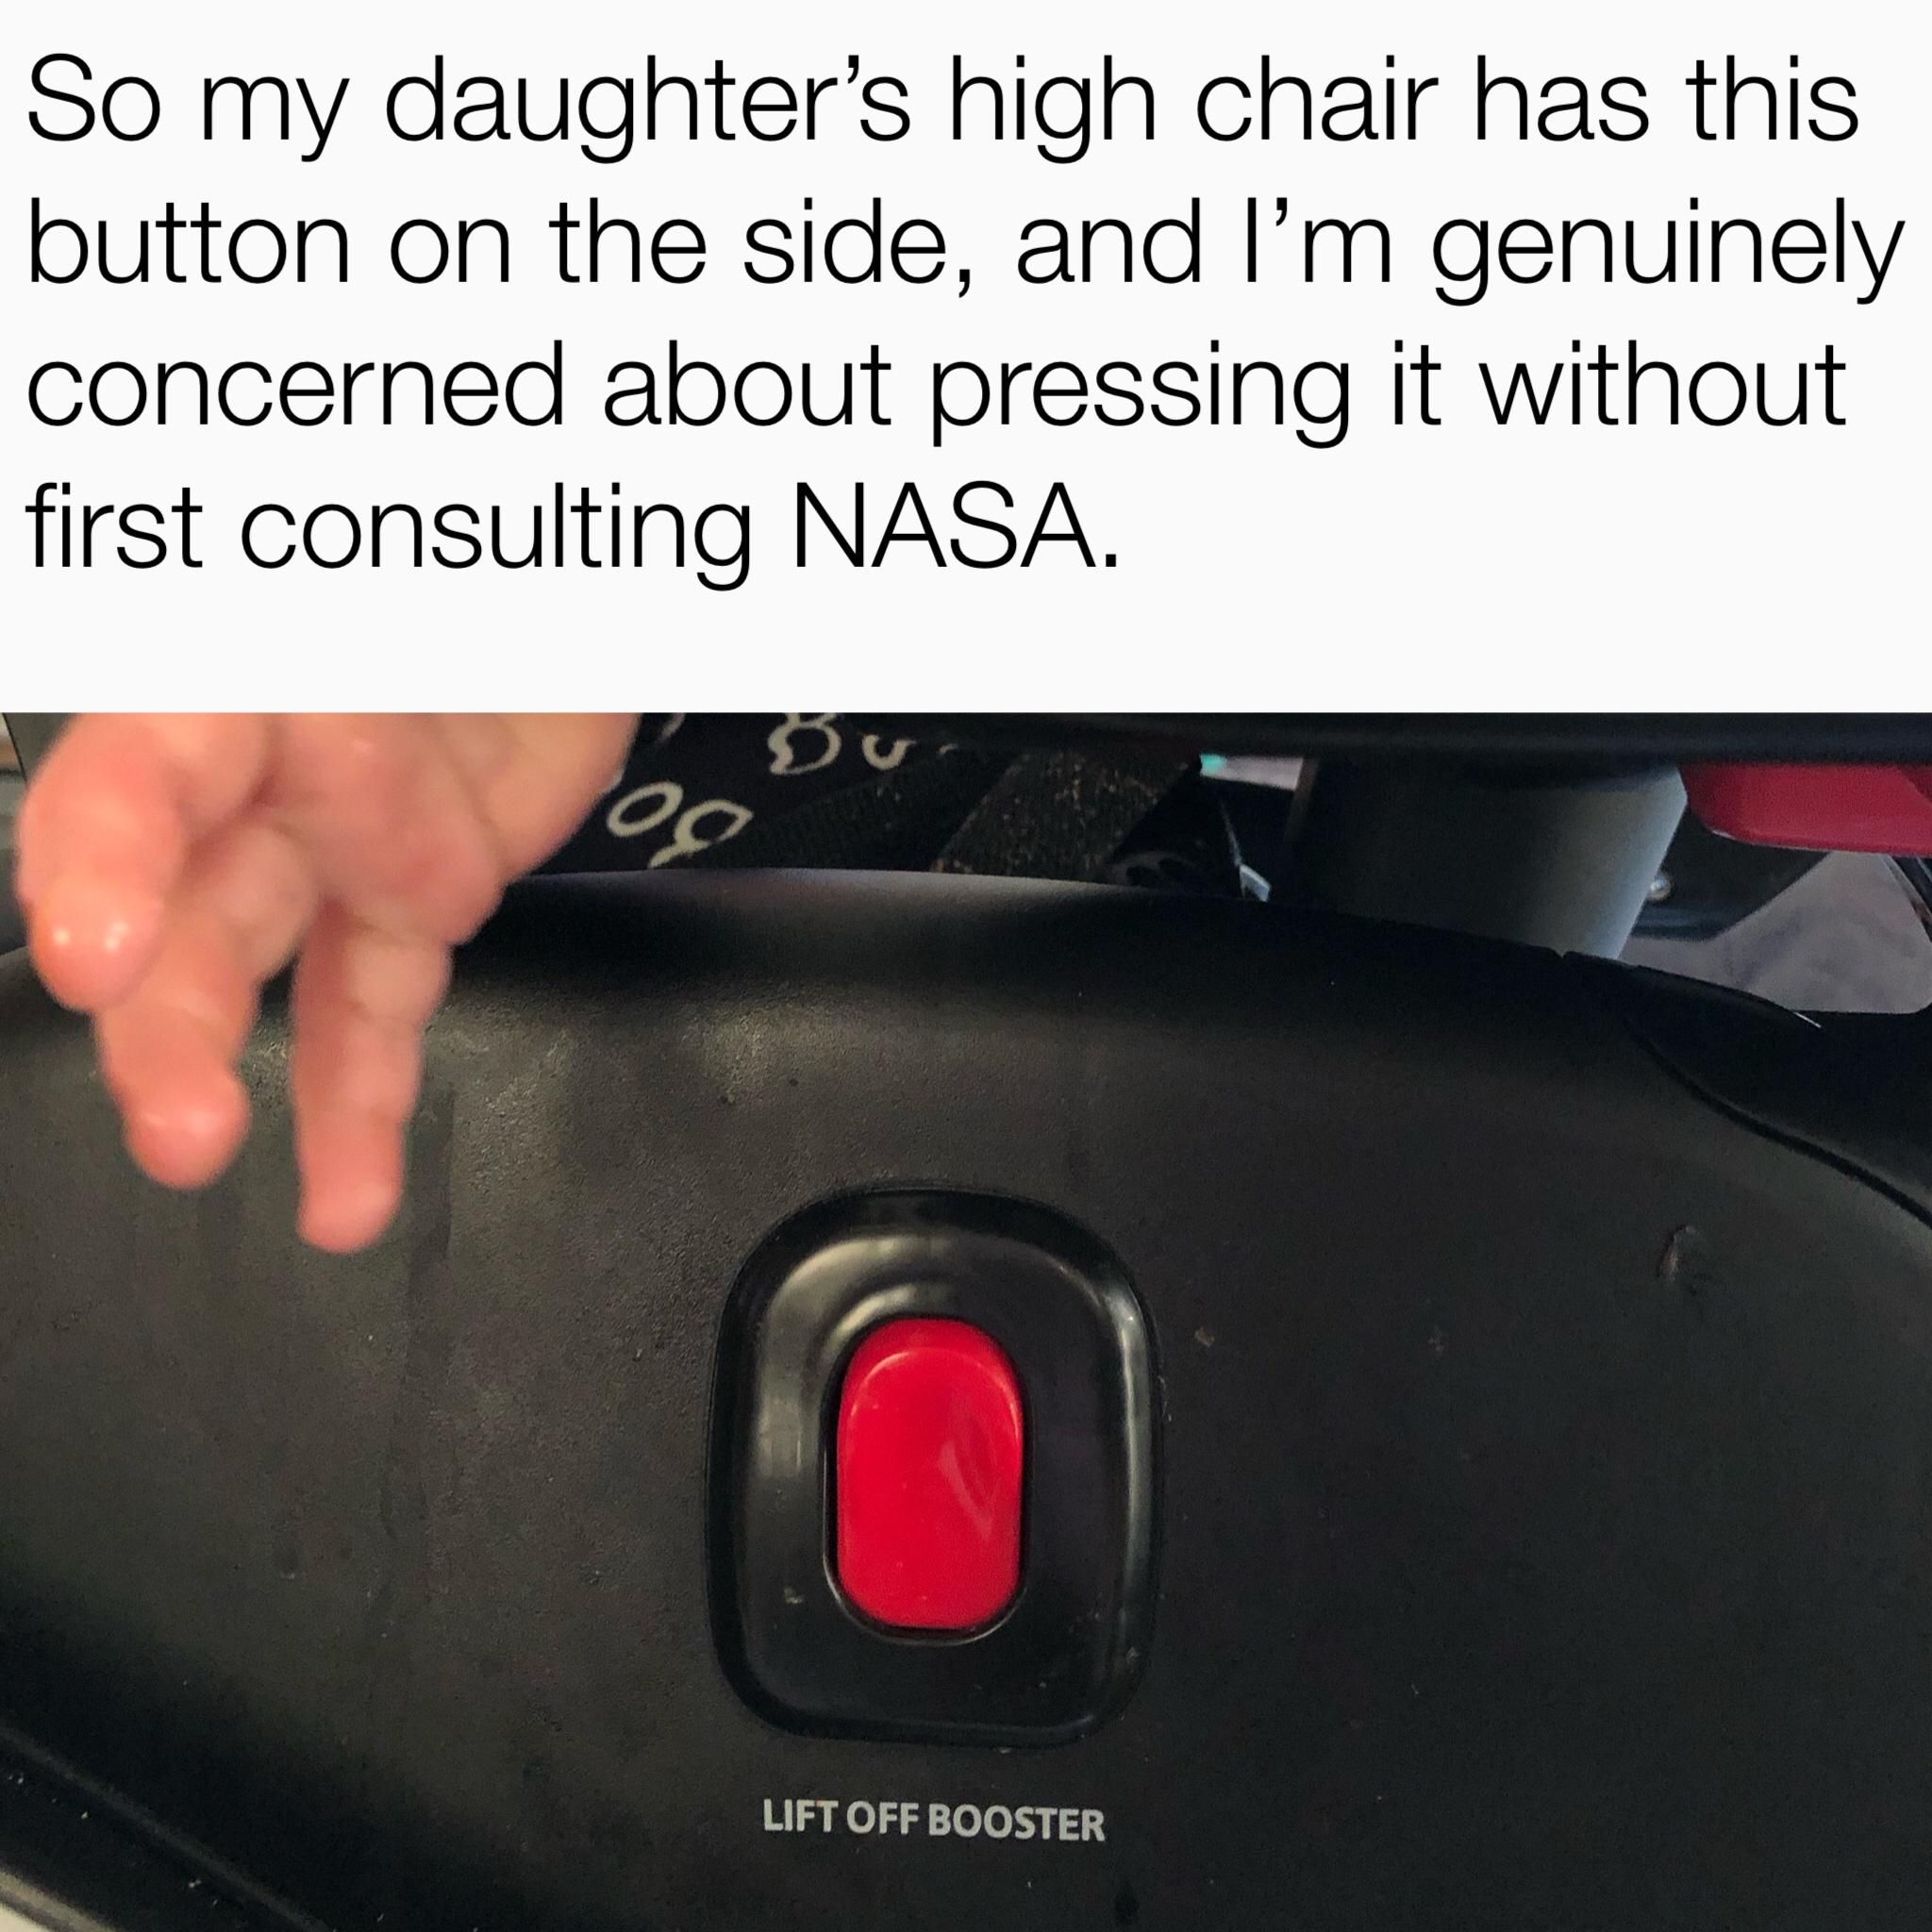 Daddy, what does this button do?